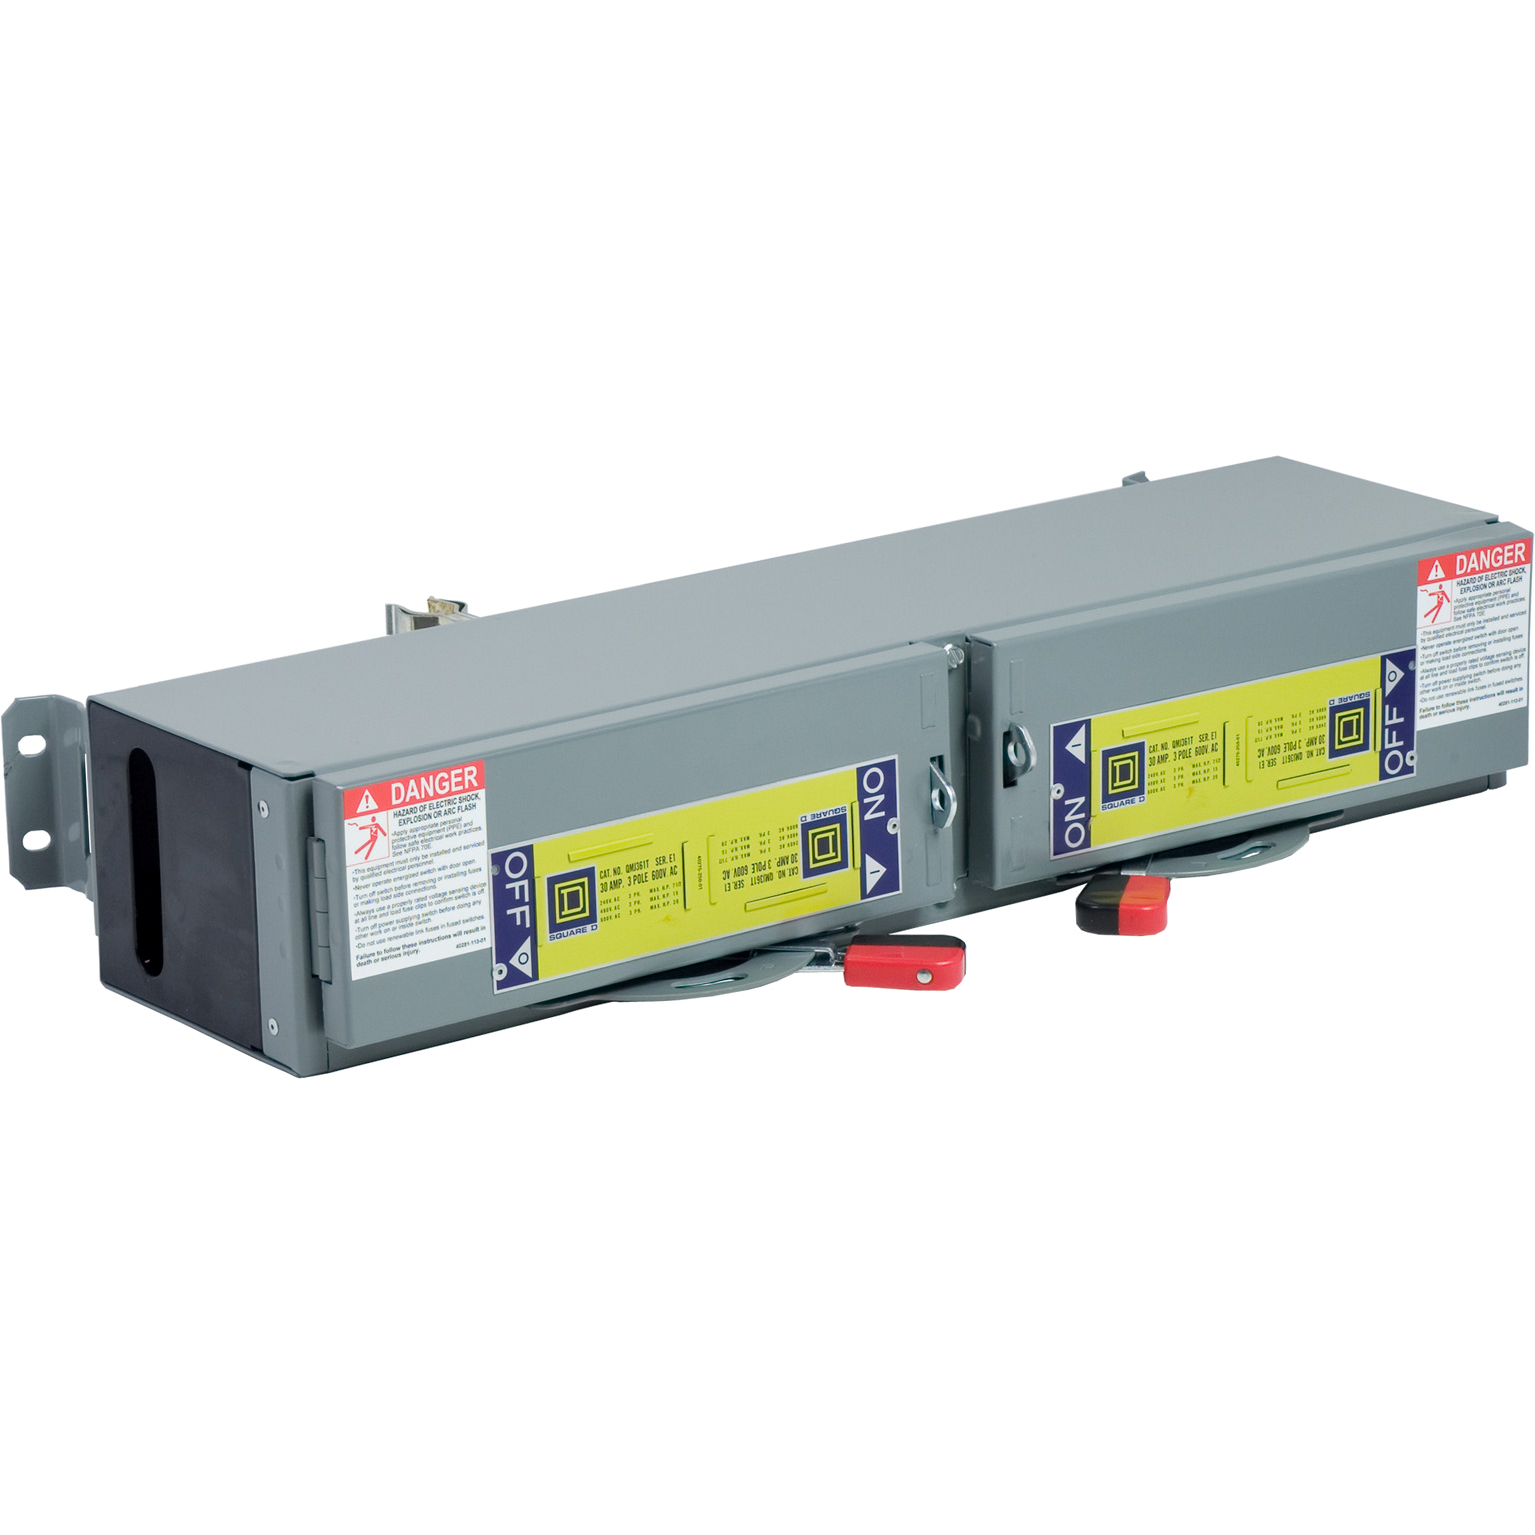 Switch unit, QMJ fusible panelboards, 30A to 30A, 600VAC, 4.5 inch, 3 pole, 20HP @ 600VAC max